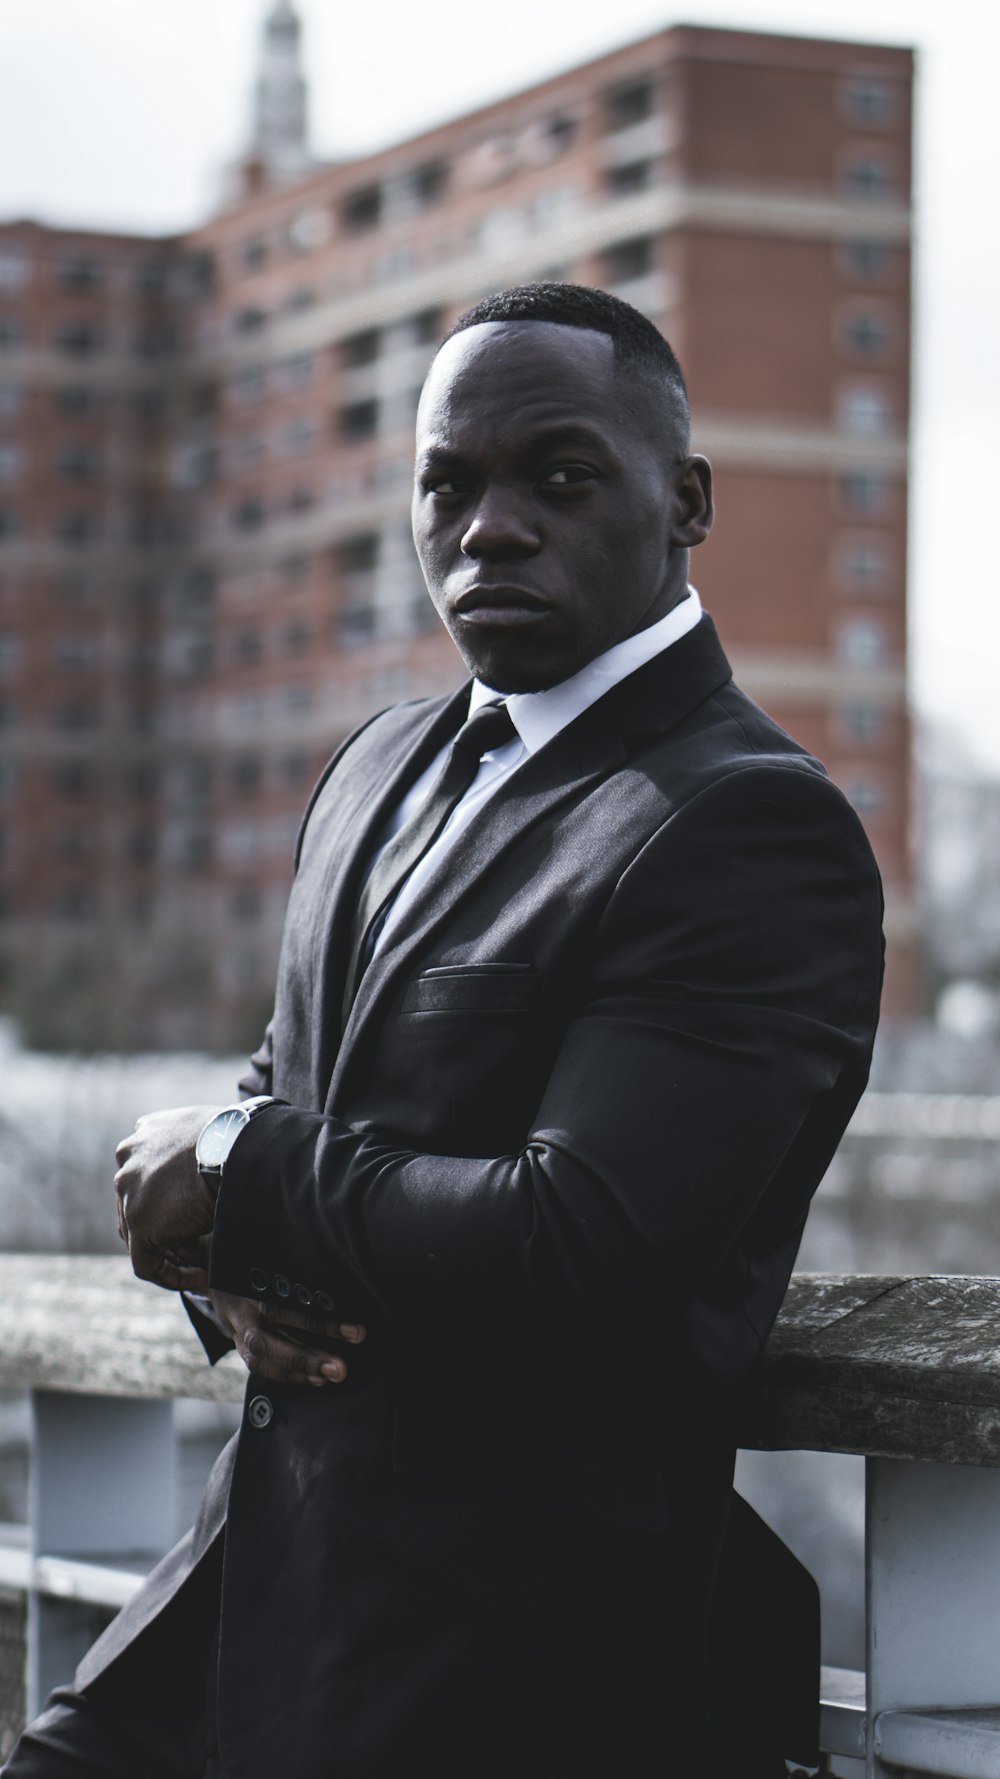 999+ Black Man In Suit Pictures | Download Free Images on Unsplash